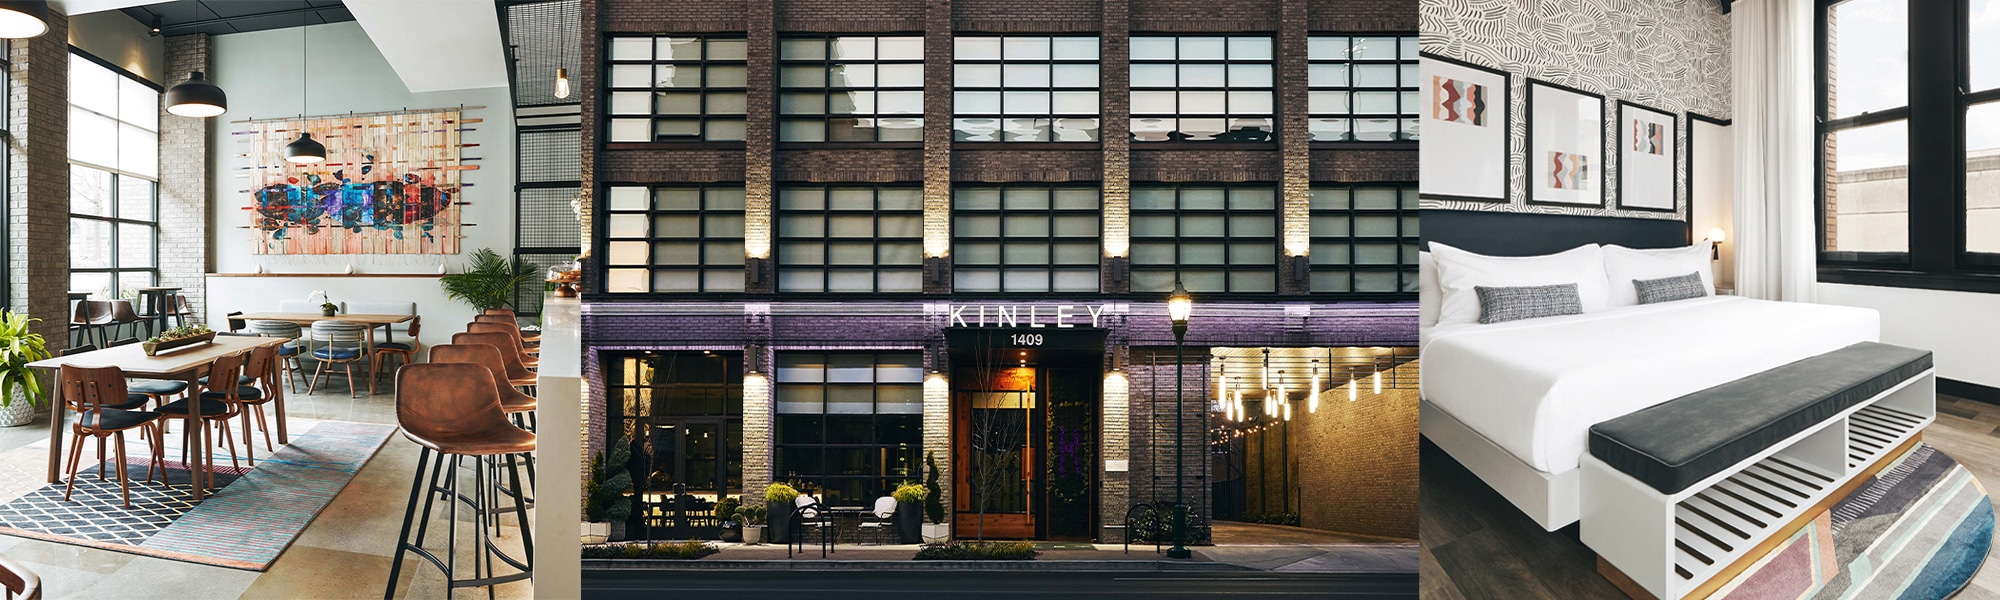 Kinley Hotels: Sincerely Yours